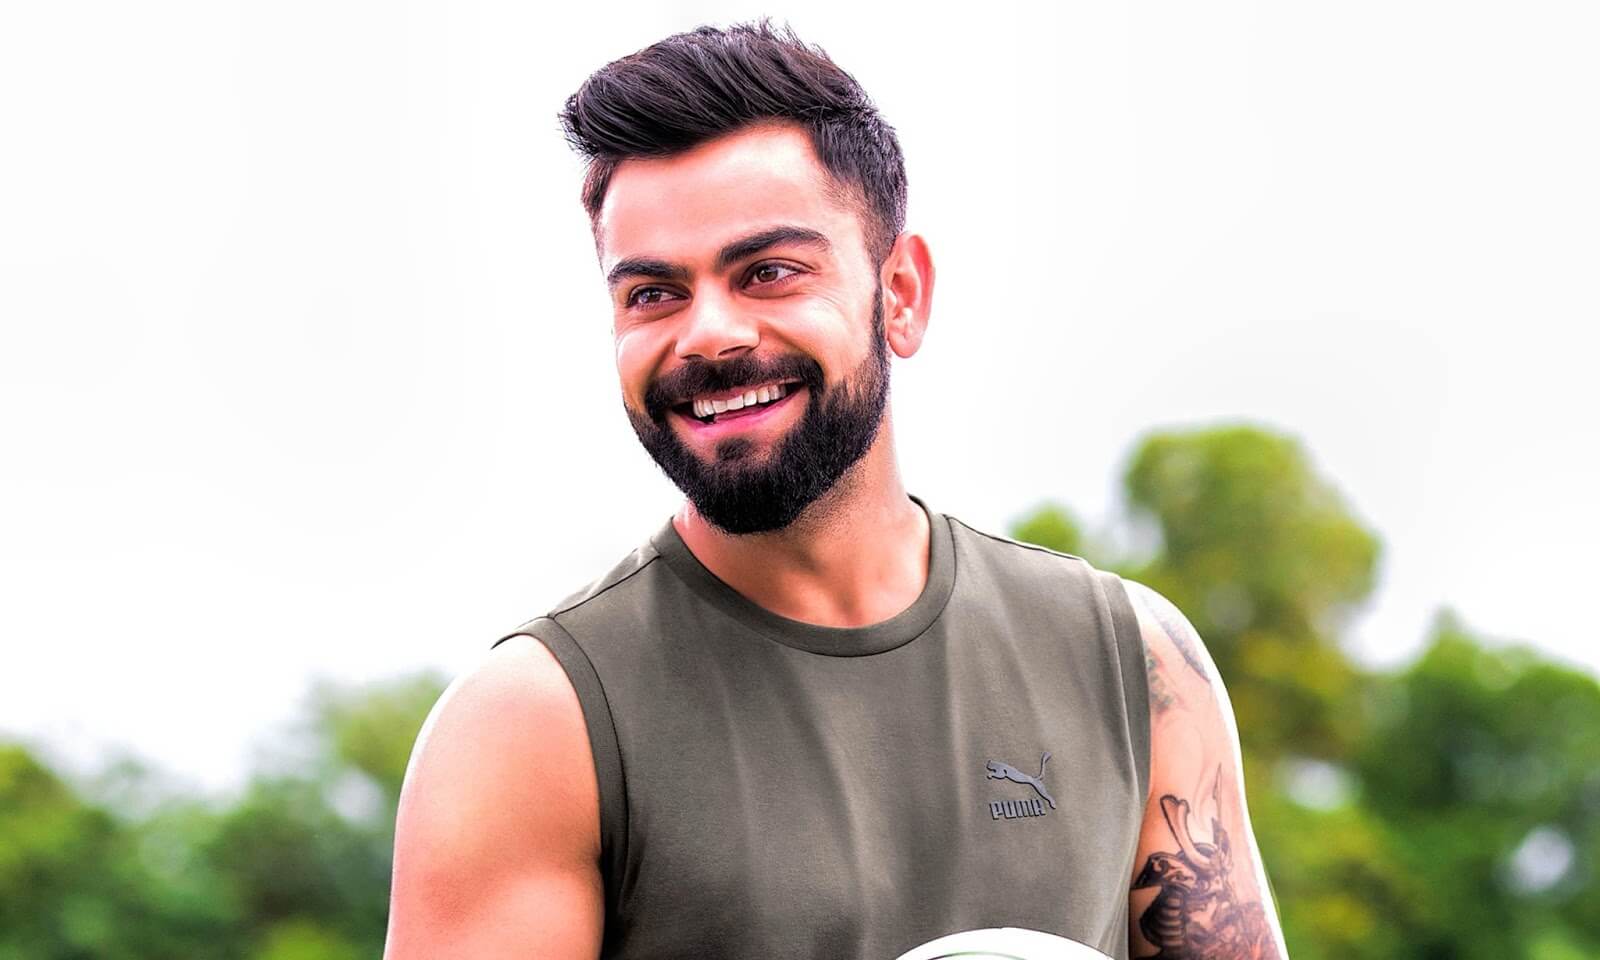 15 Virat Kohli Hairstyles To Get In 2018 – 11th Is New - Live Enhanced